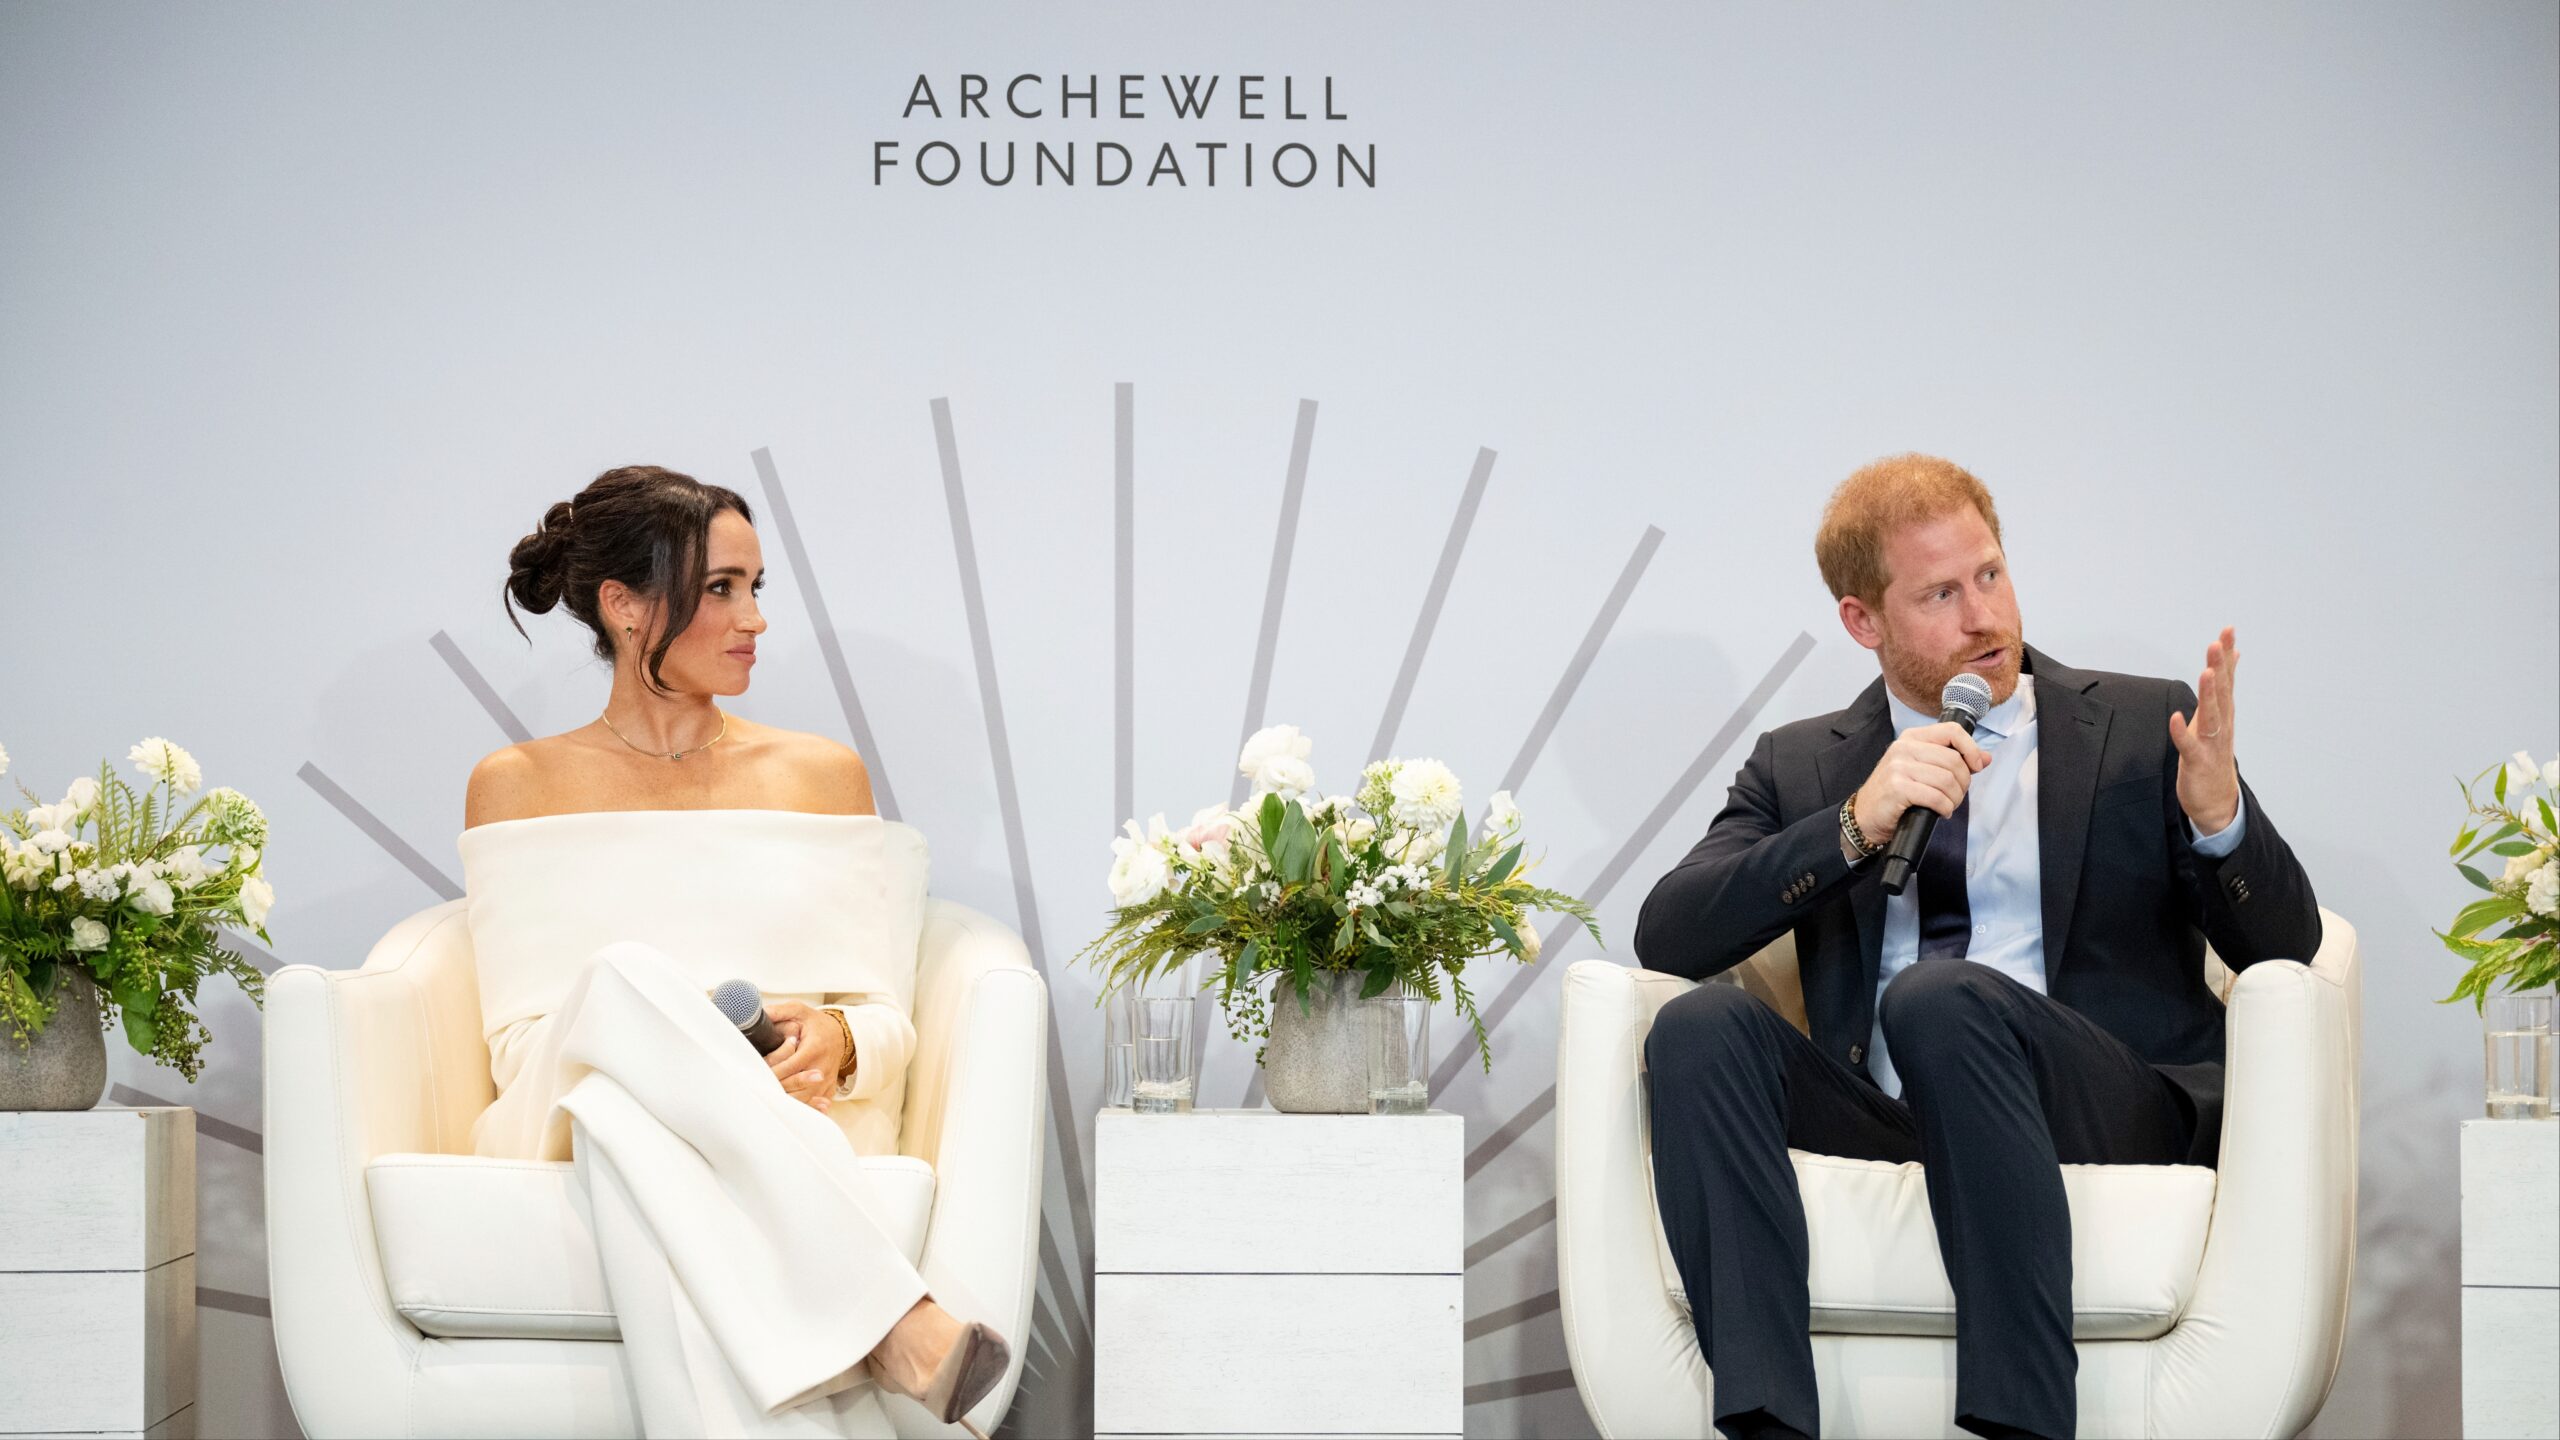  Harry-And-Meghan-News-Archewell-Foundation